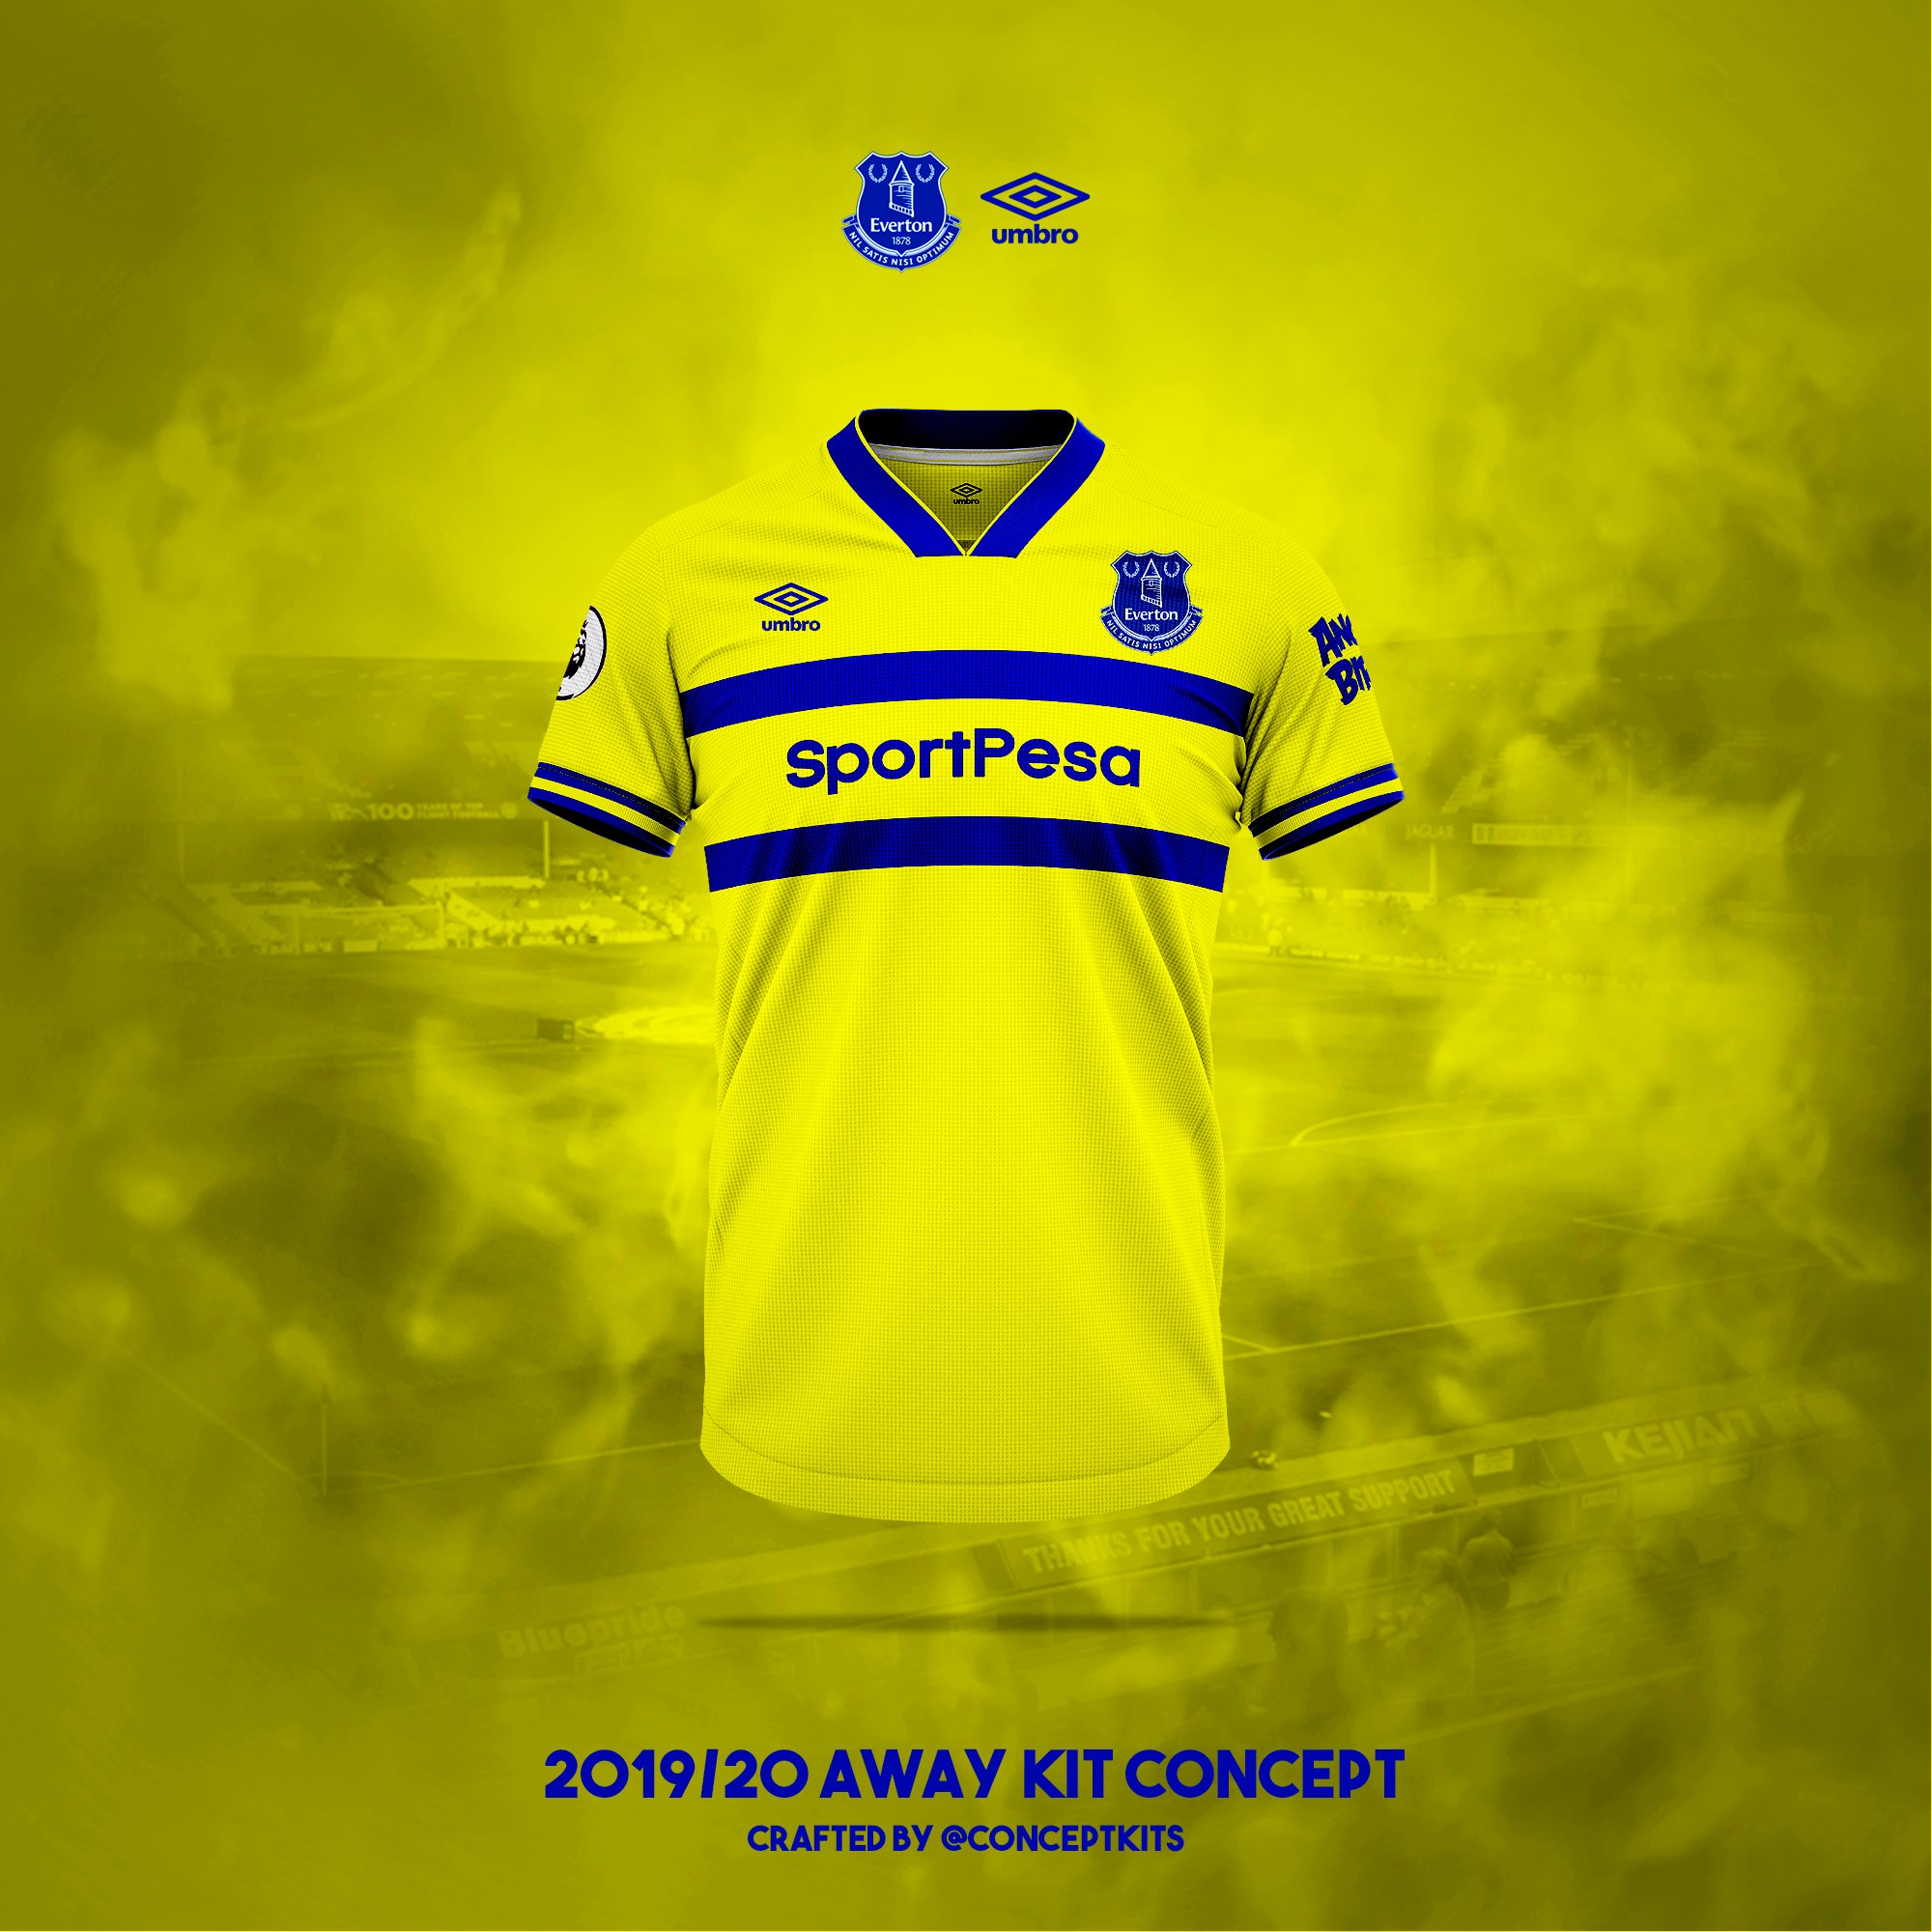 Everton's 2019/20 Concept Kits Have Arrived. See What You Think.